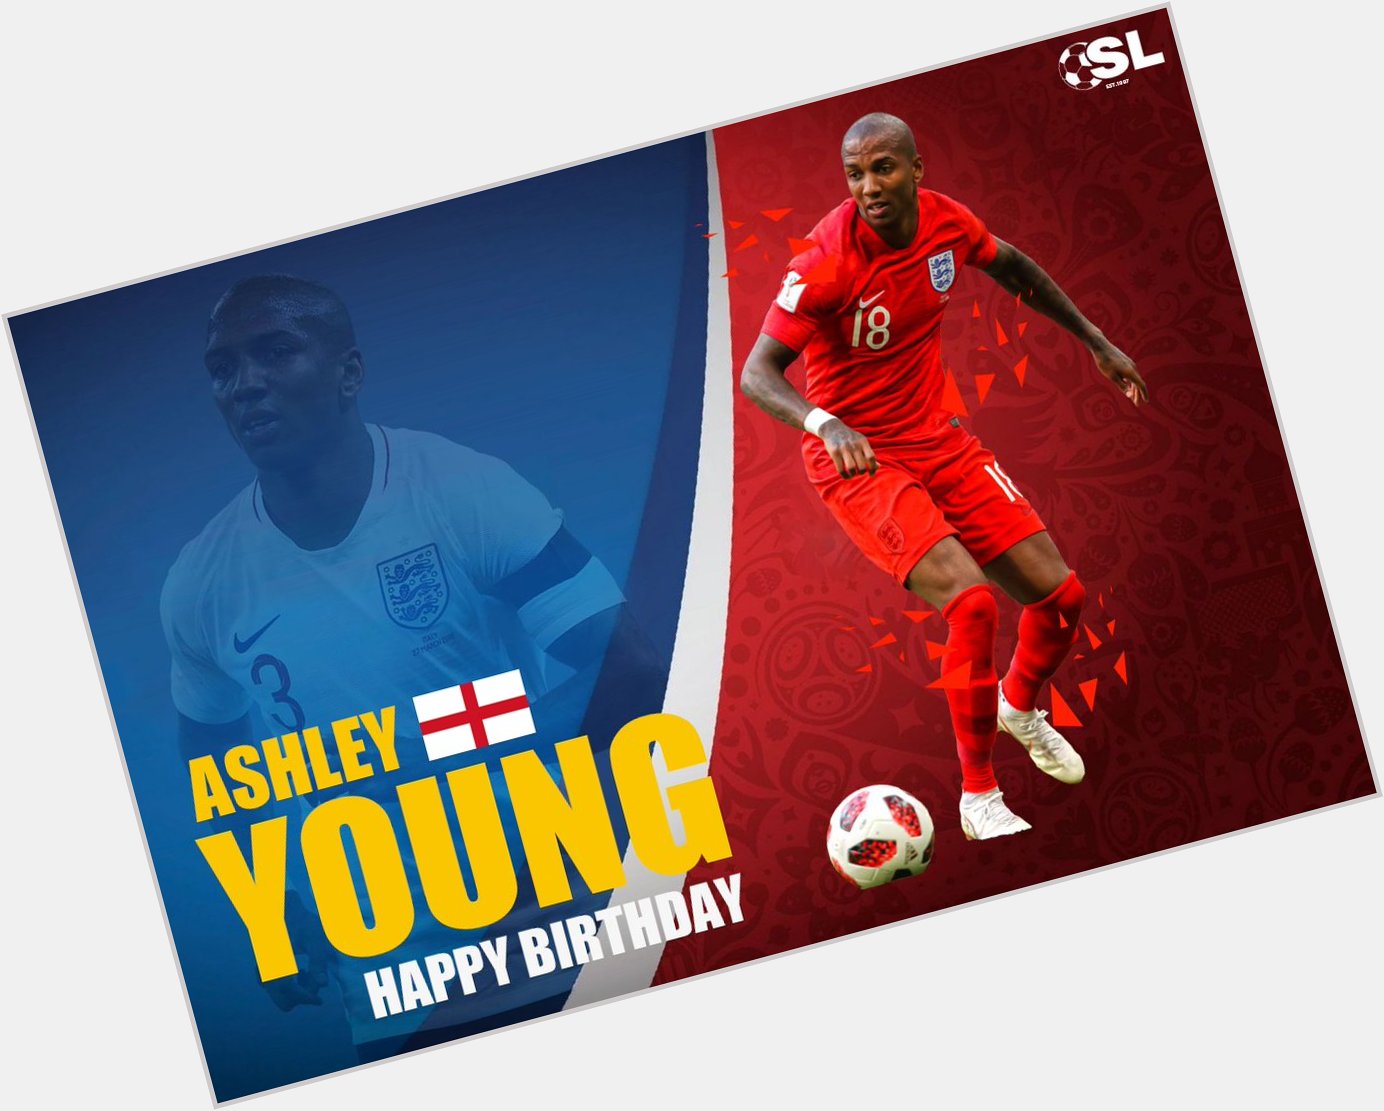 Ashley Young is celebrating his special day today! Join us in wishing the midfielder a Happy 33rd Birthday! 